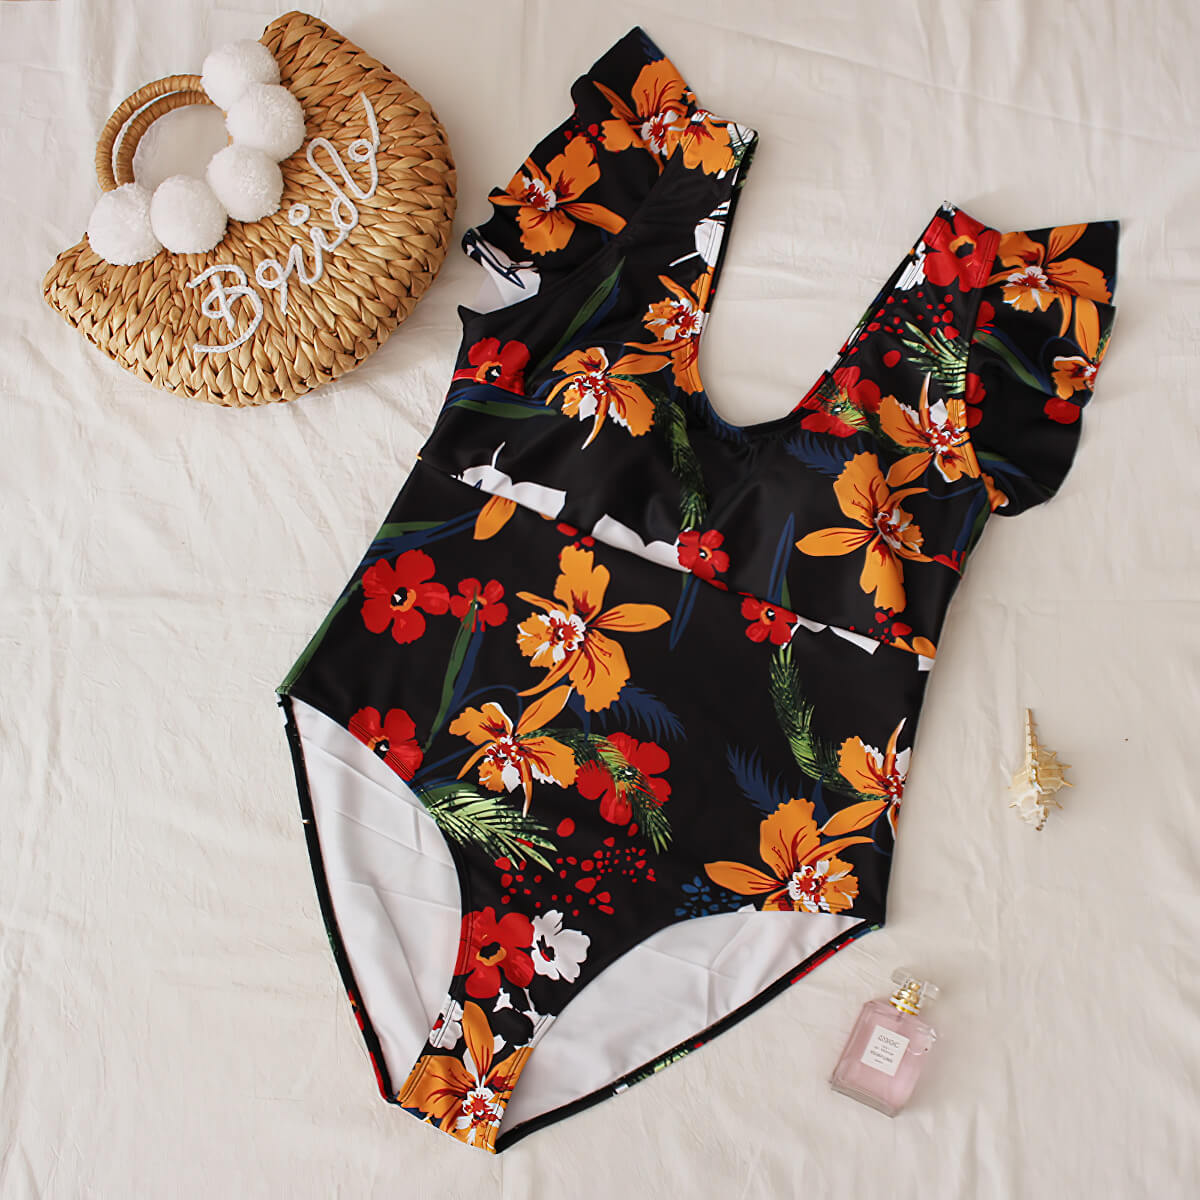 Plus Size Ruffle Swimsuit Flower Printed